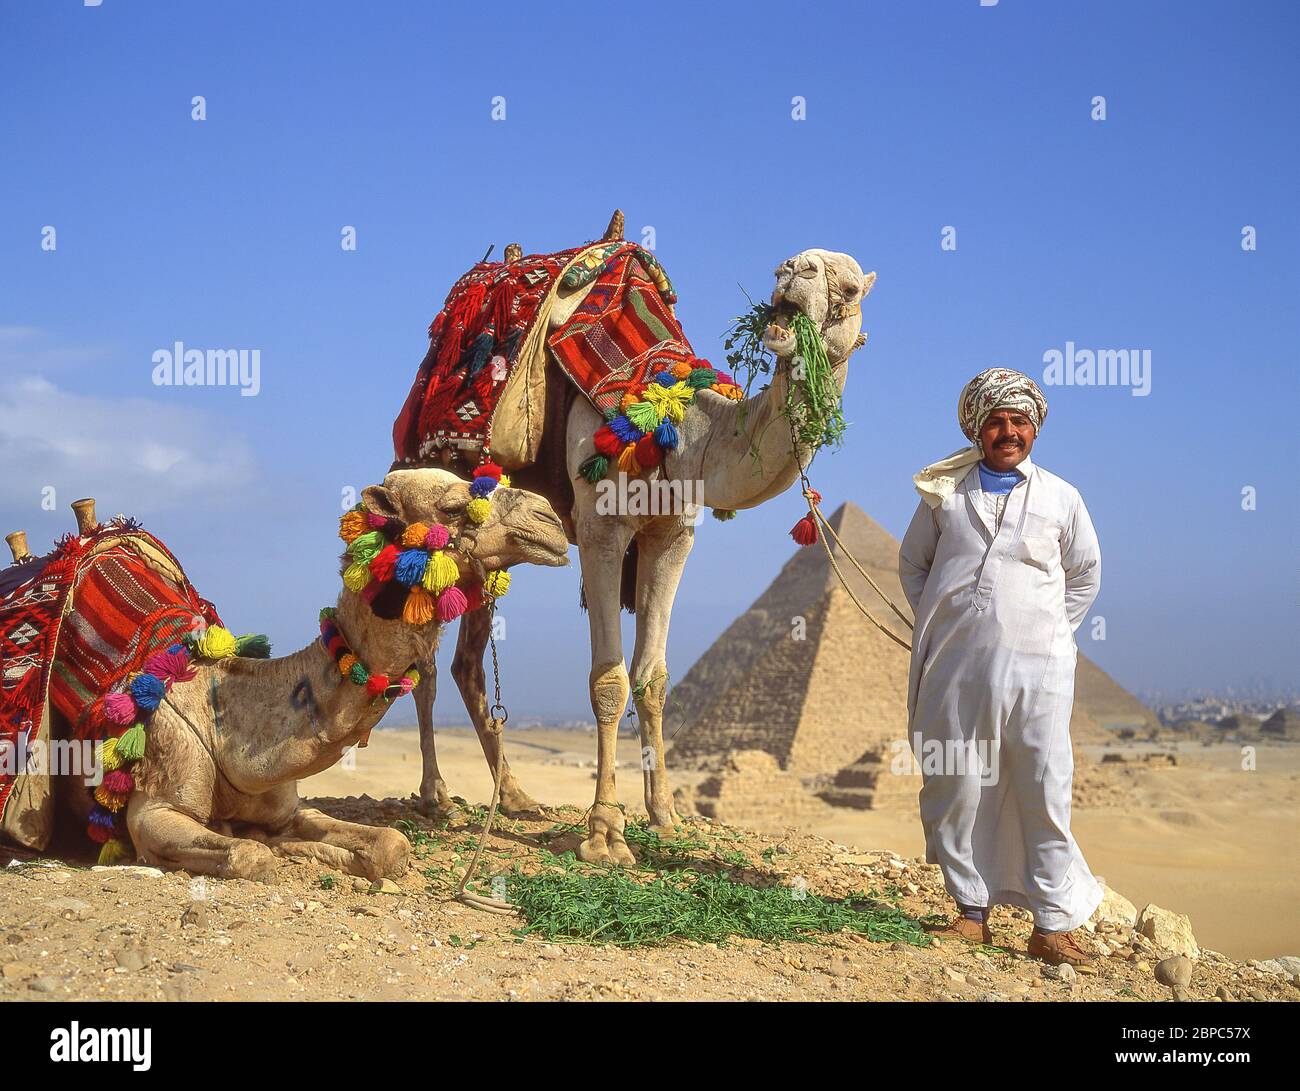 Camel driver with camels, The Great Pyramids of Giza, Giza, Giza Governate, Republic of Egypt Stock Photo